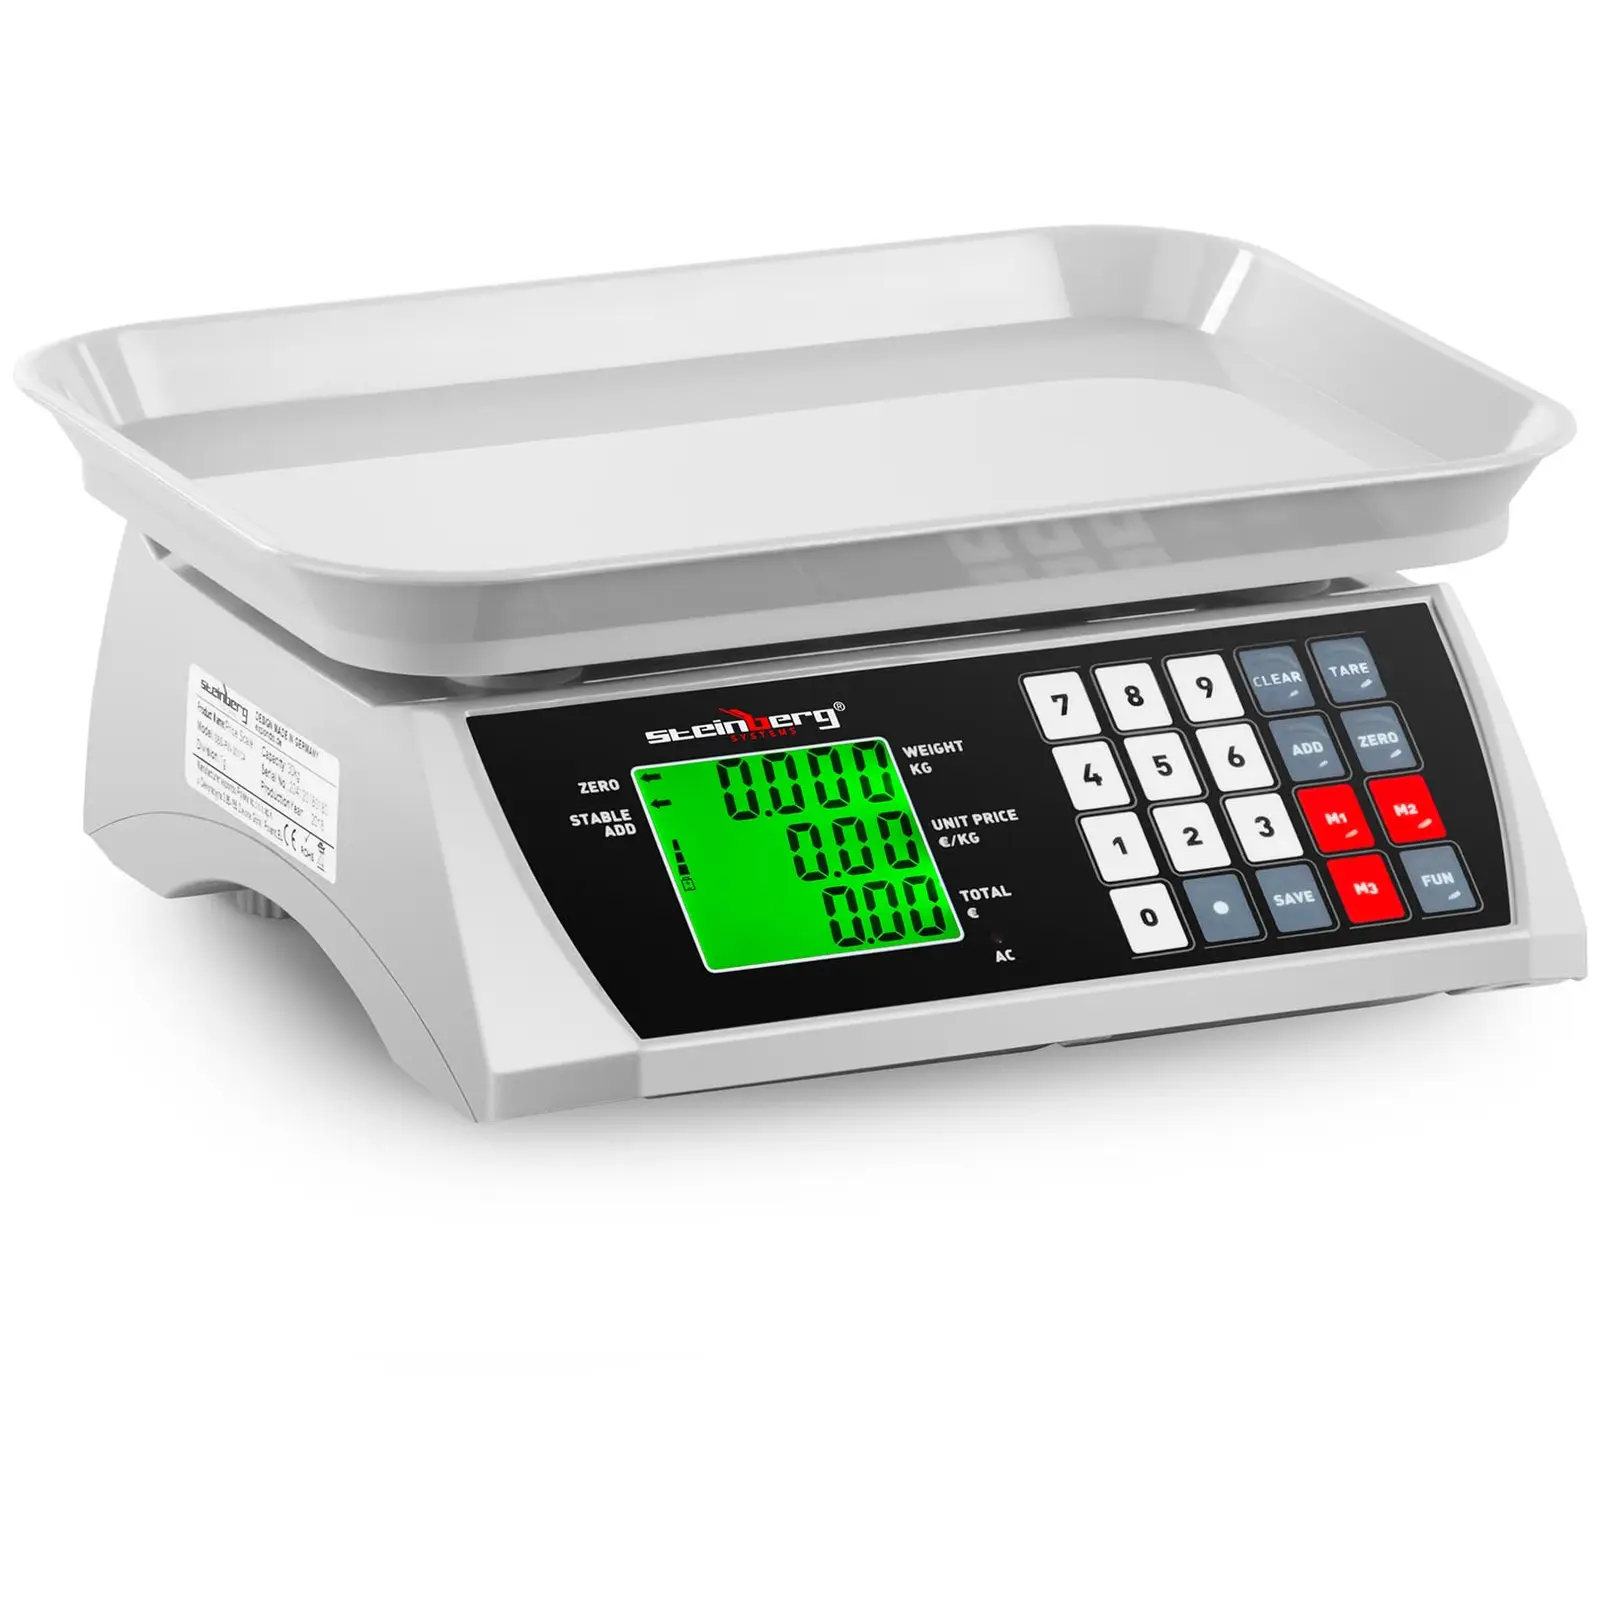 Price-Calculating Scale - 30 kg / 1 g - 28.8 x 21.8 cm - LCD